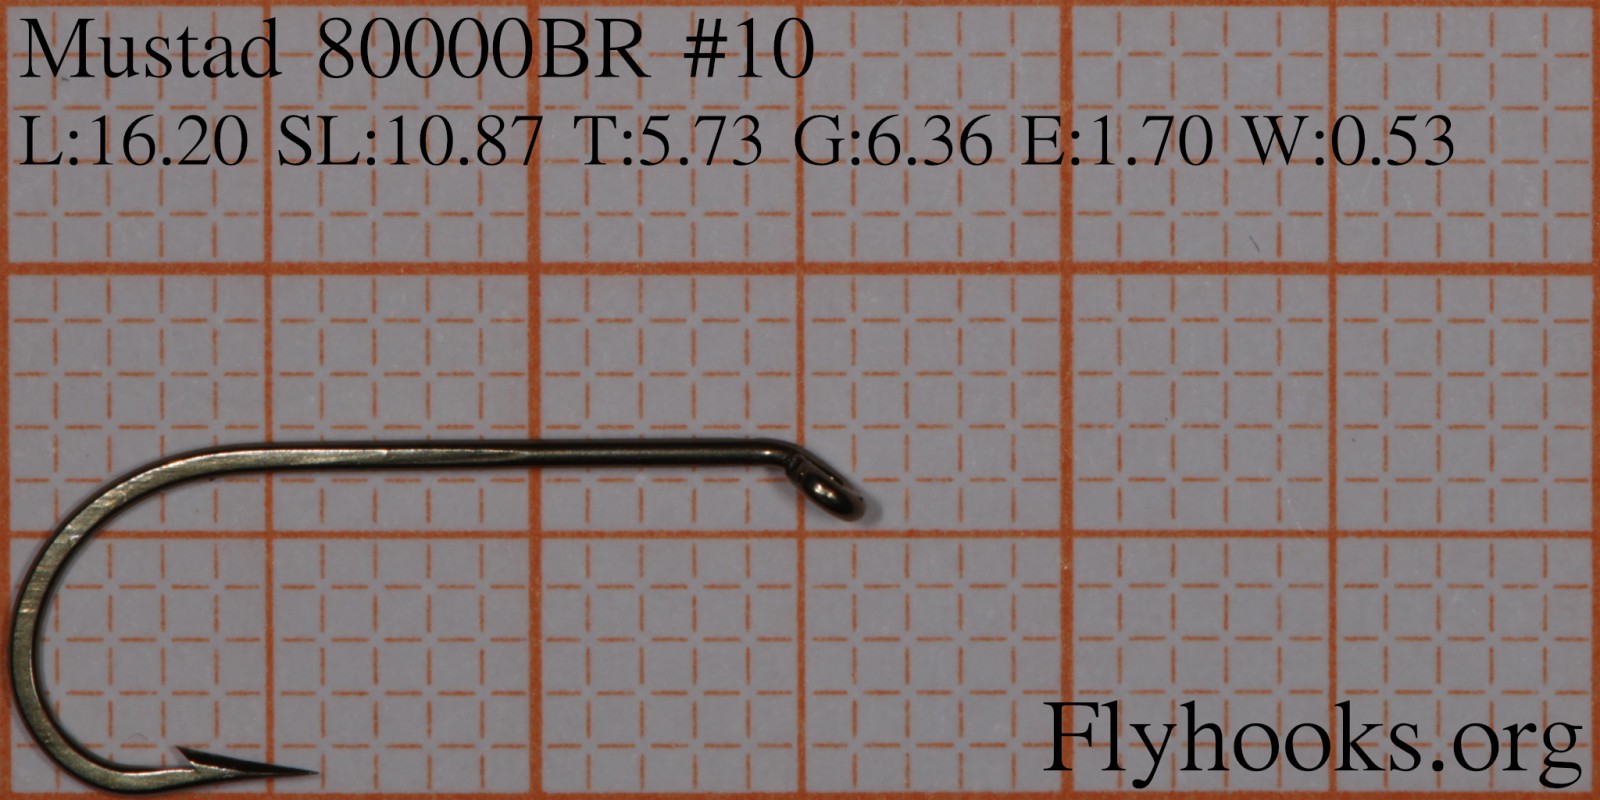 Details about   MUSTAD SIGNATURE SERIES C53NPBR FLY HOOKS SIX SIZES 6,8,10,12,14,16 